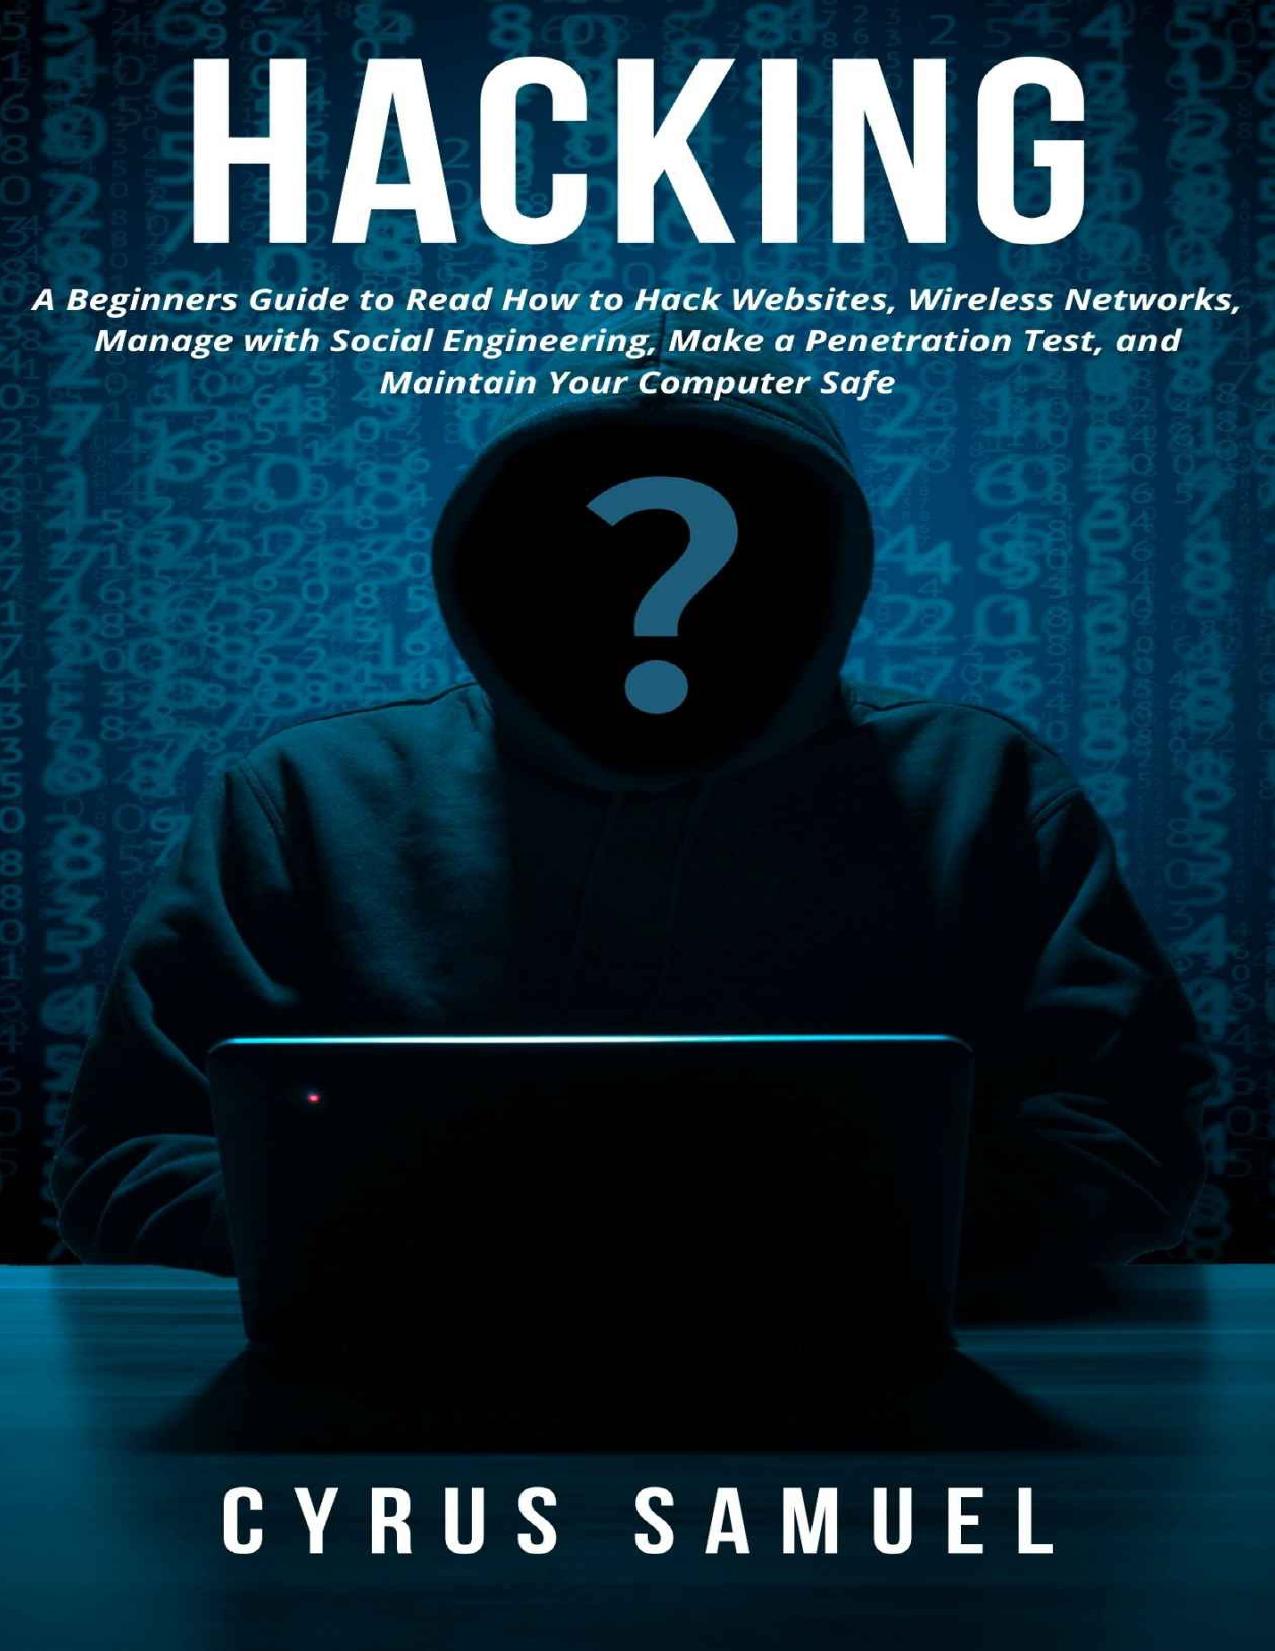 Hacking: A Beginners Guide to Read How to Hack Websites, Wireless Networks, Manage with Social Engineering, Make a Penetration Test, and Maintain Your Computer Safe by Cyrus Samuel